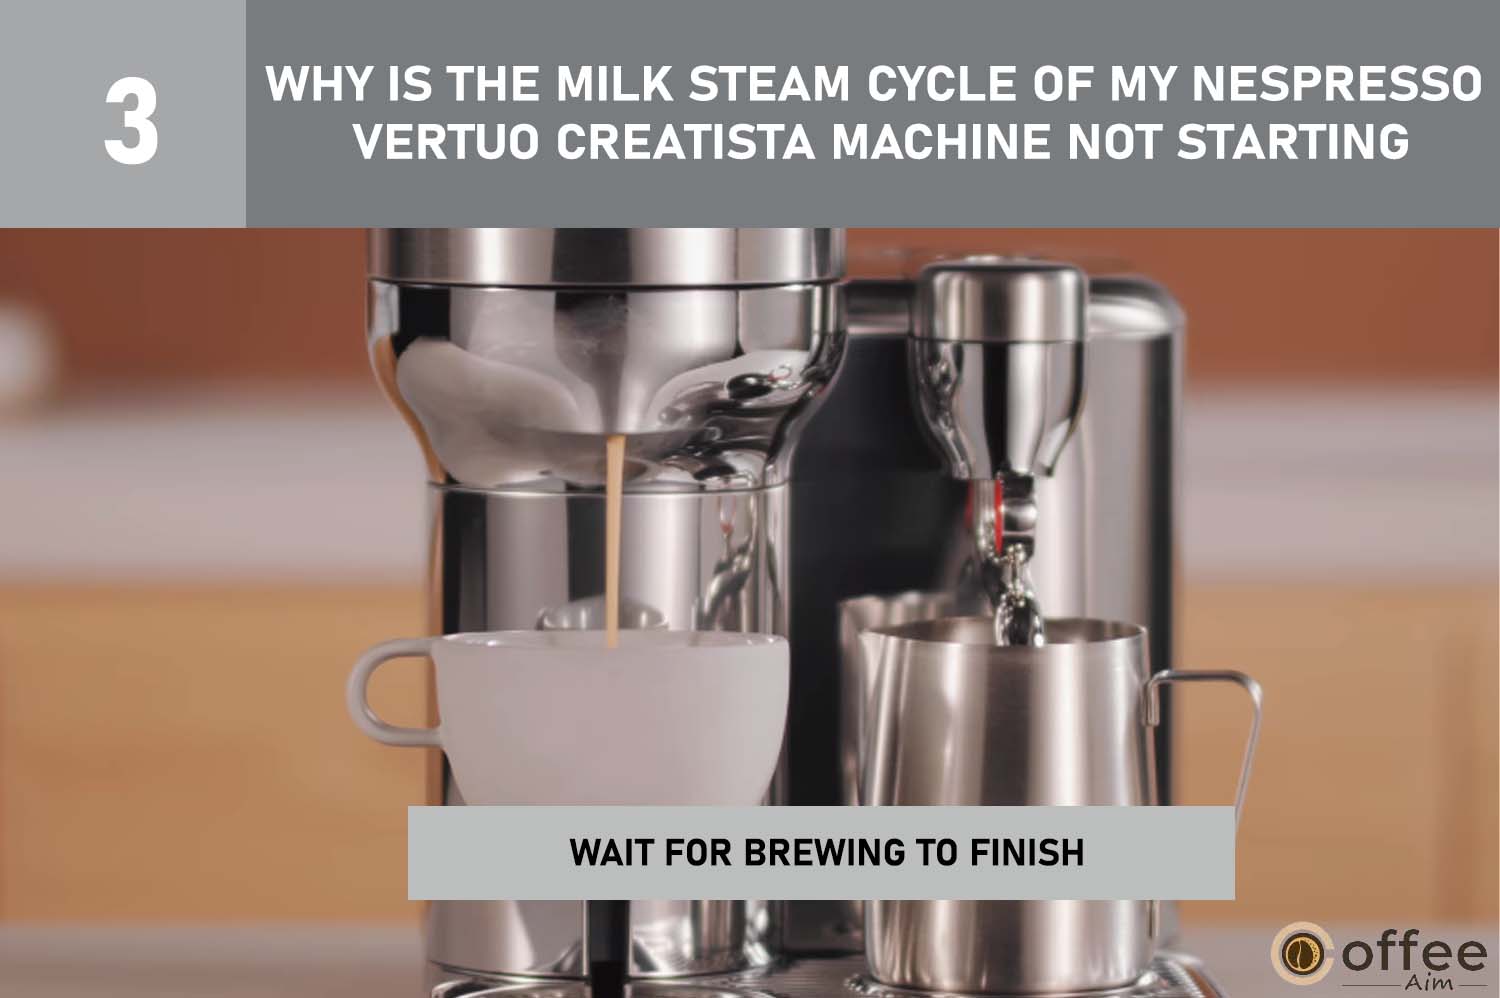 The image illustrates the process of waiting for the Nespresso Vertuo Creatista machine to complete the milk steaming cycle.